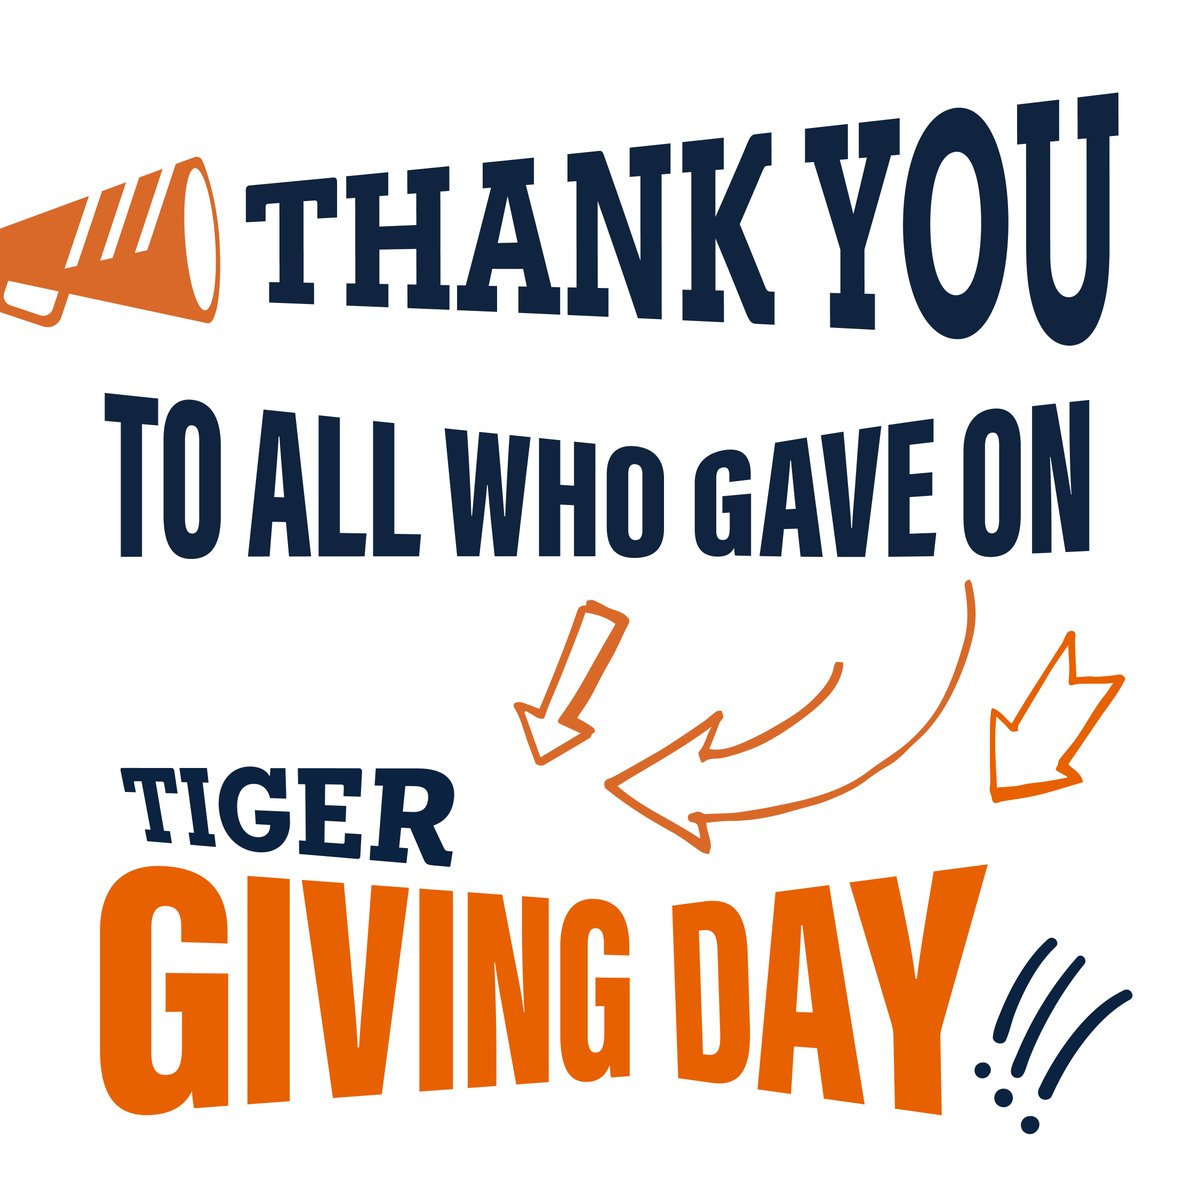 The Graduate School is thankful to all of those who donated to our mini food pantry project this #TigerGivingDay. Your donations will go towards purchasing new shelving, refrigerator storage, and food supplies. #augradschool #augraduateschool #auburnu